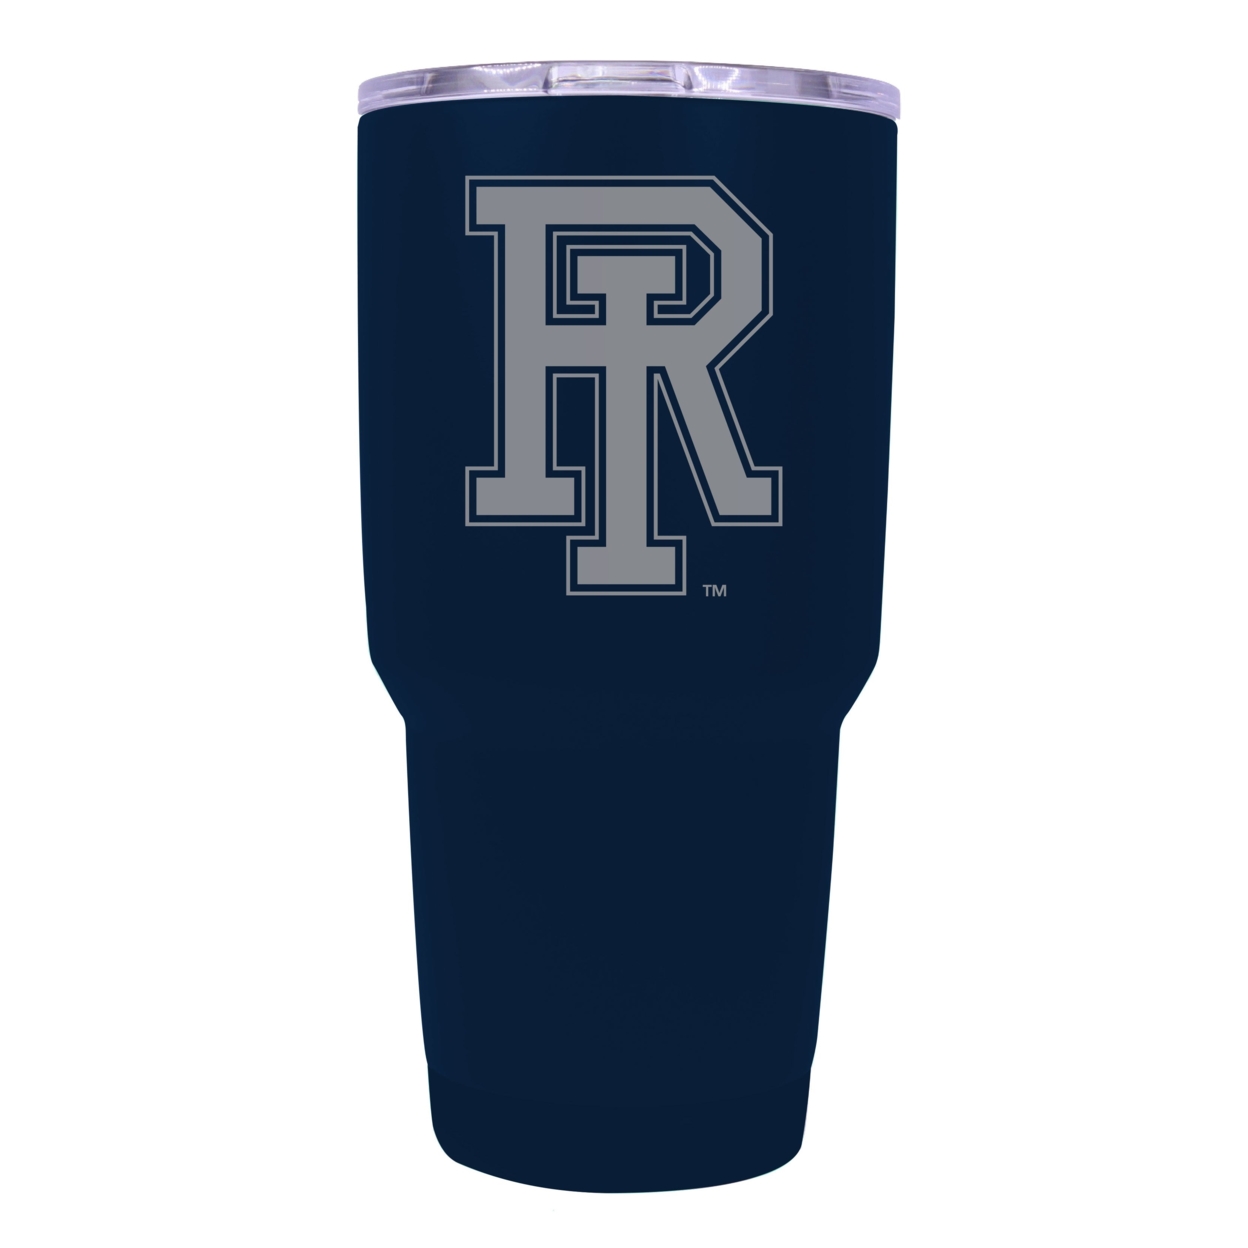 Rhode Island University 24 Oz Laser Engraved Stainless Steel Insulated Tumbler - Choose Your Color. - Seafoam